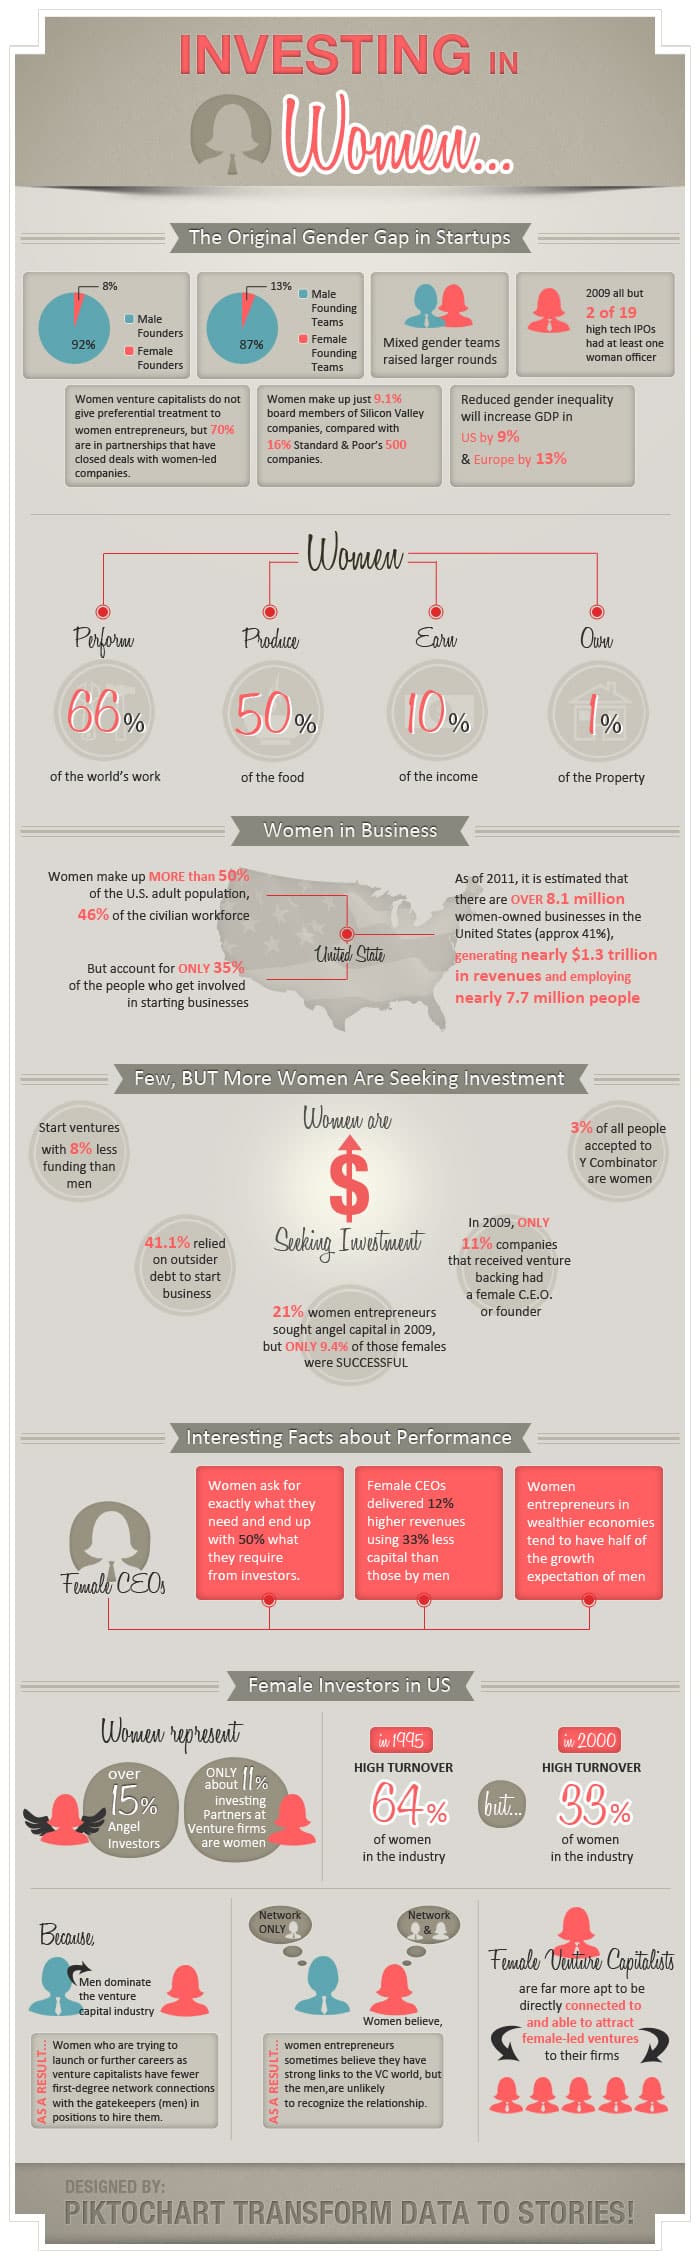 investing in women infographic